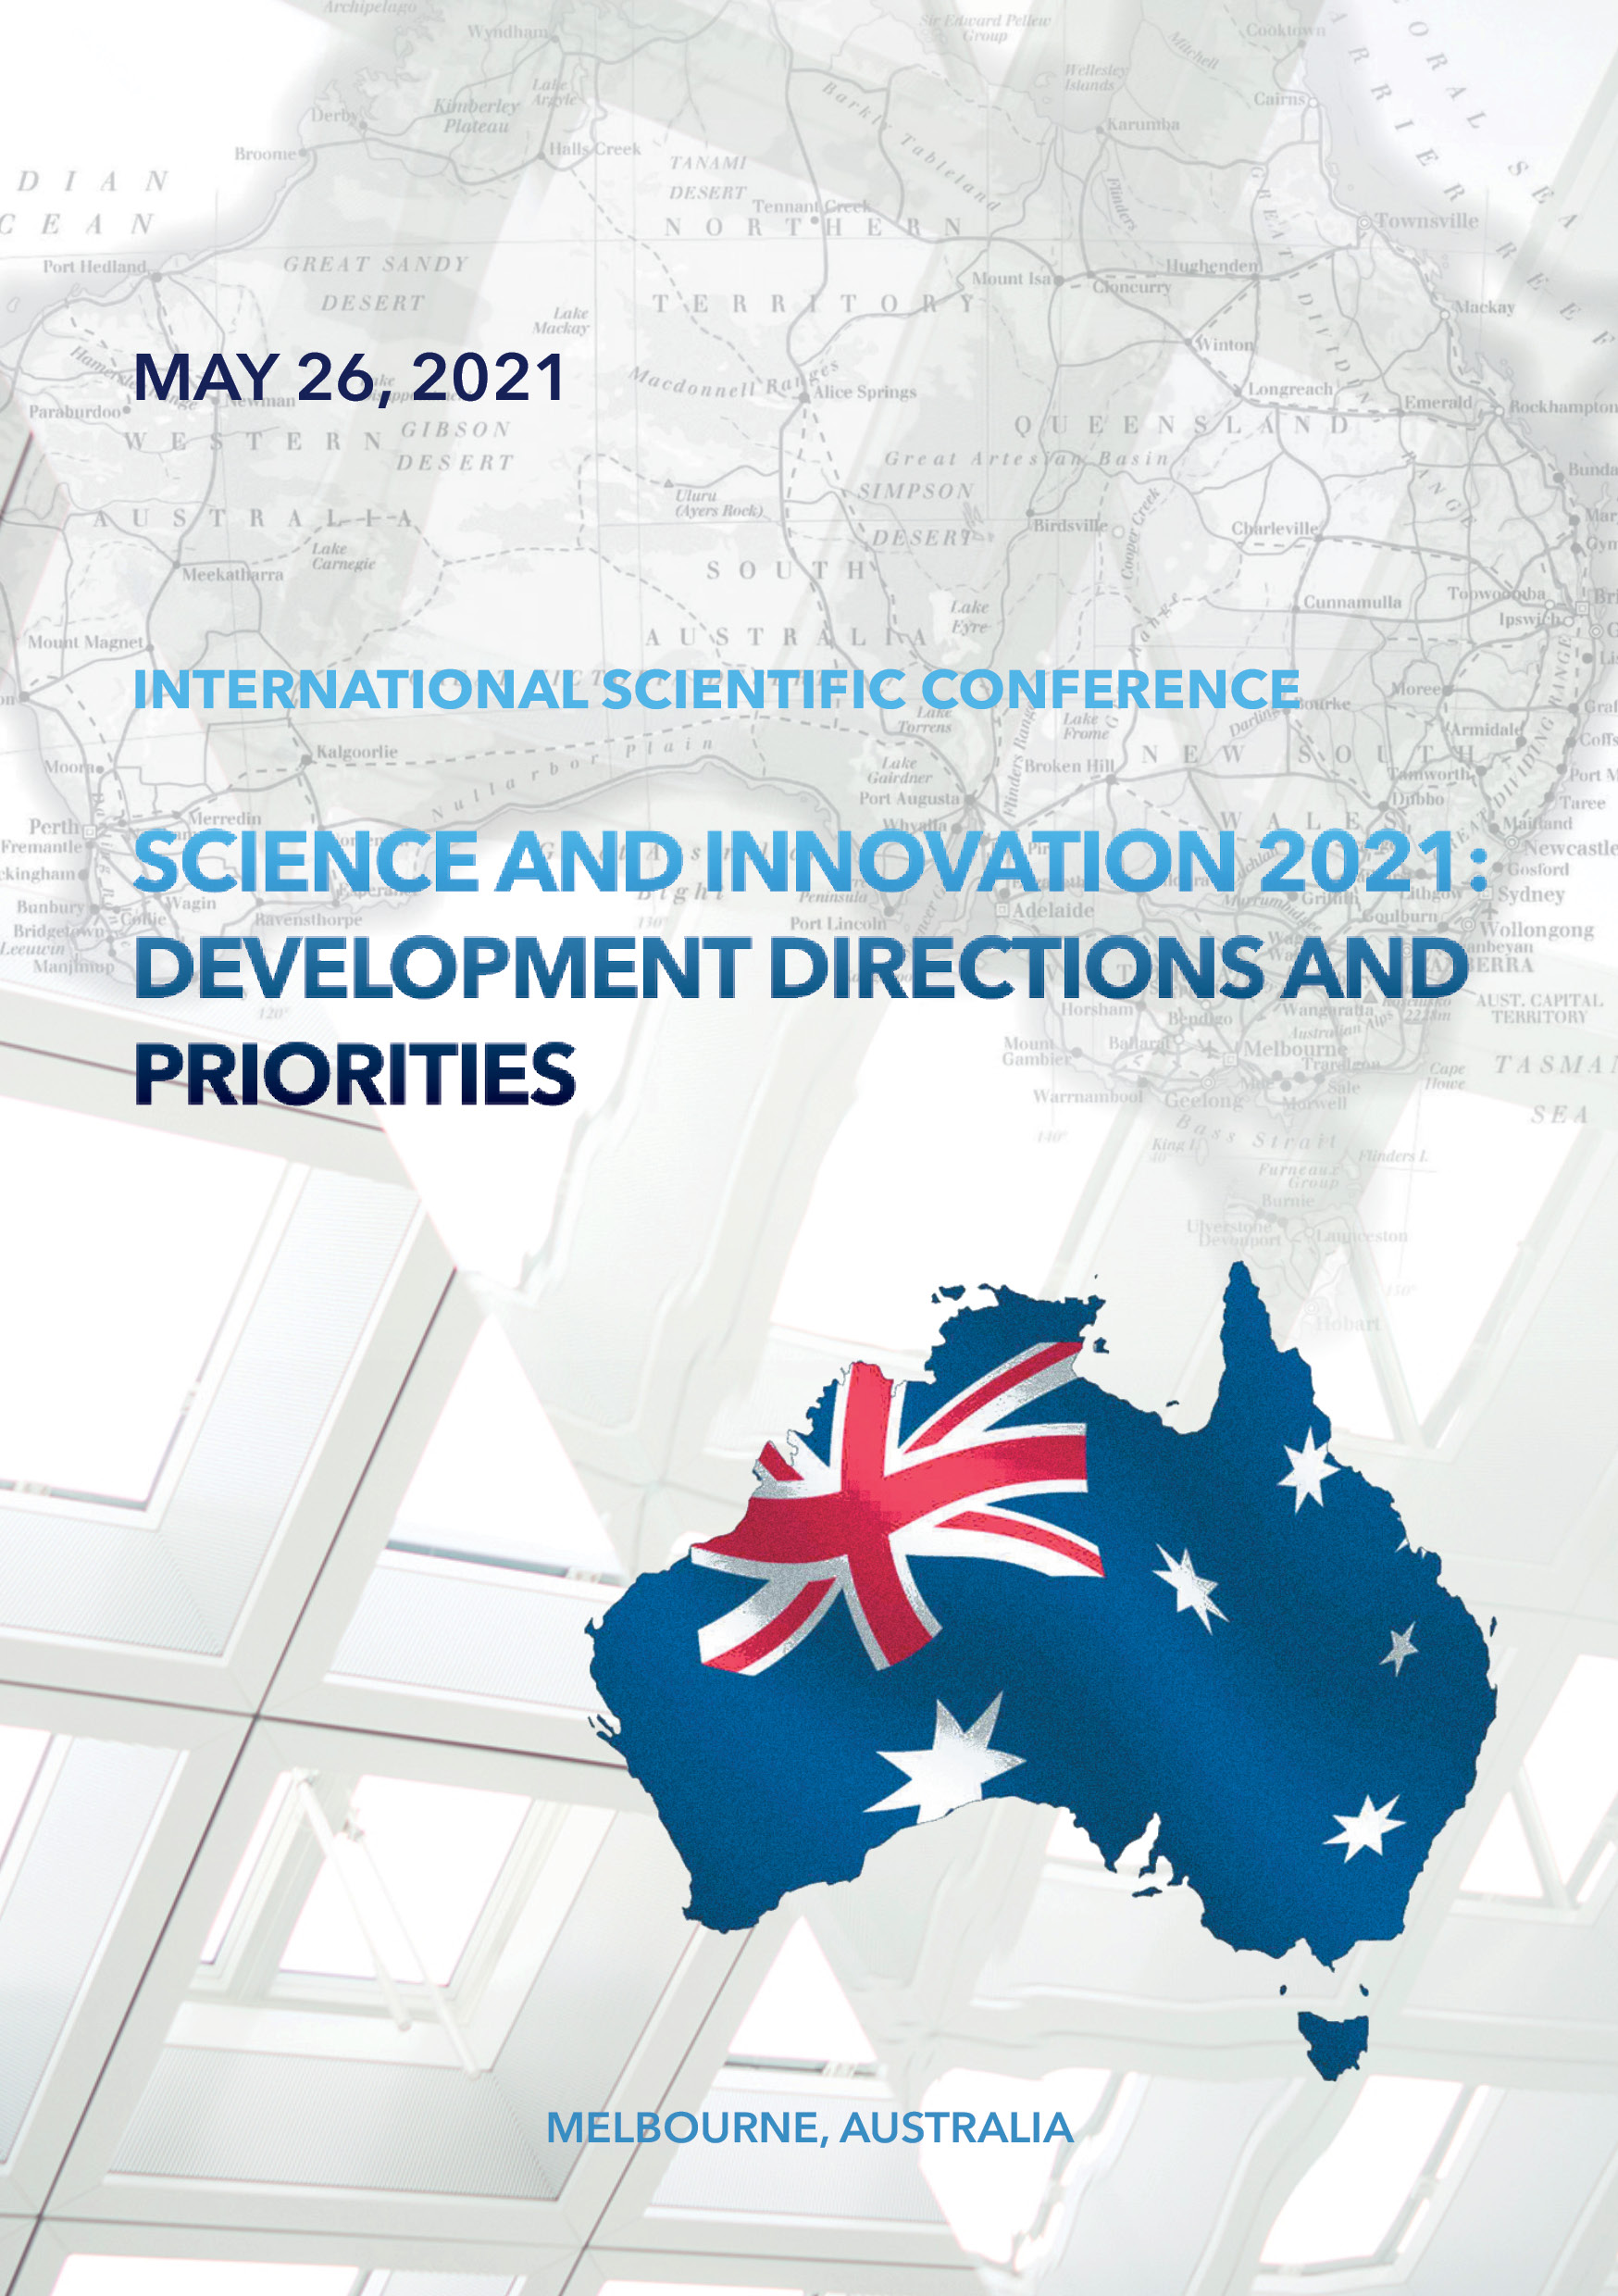             SCIENCE AND INNOVATION 2021: DEVELOPMENT DIRECTIONS AND PRIORITIES
    